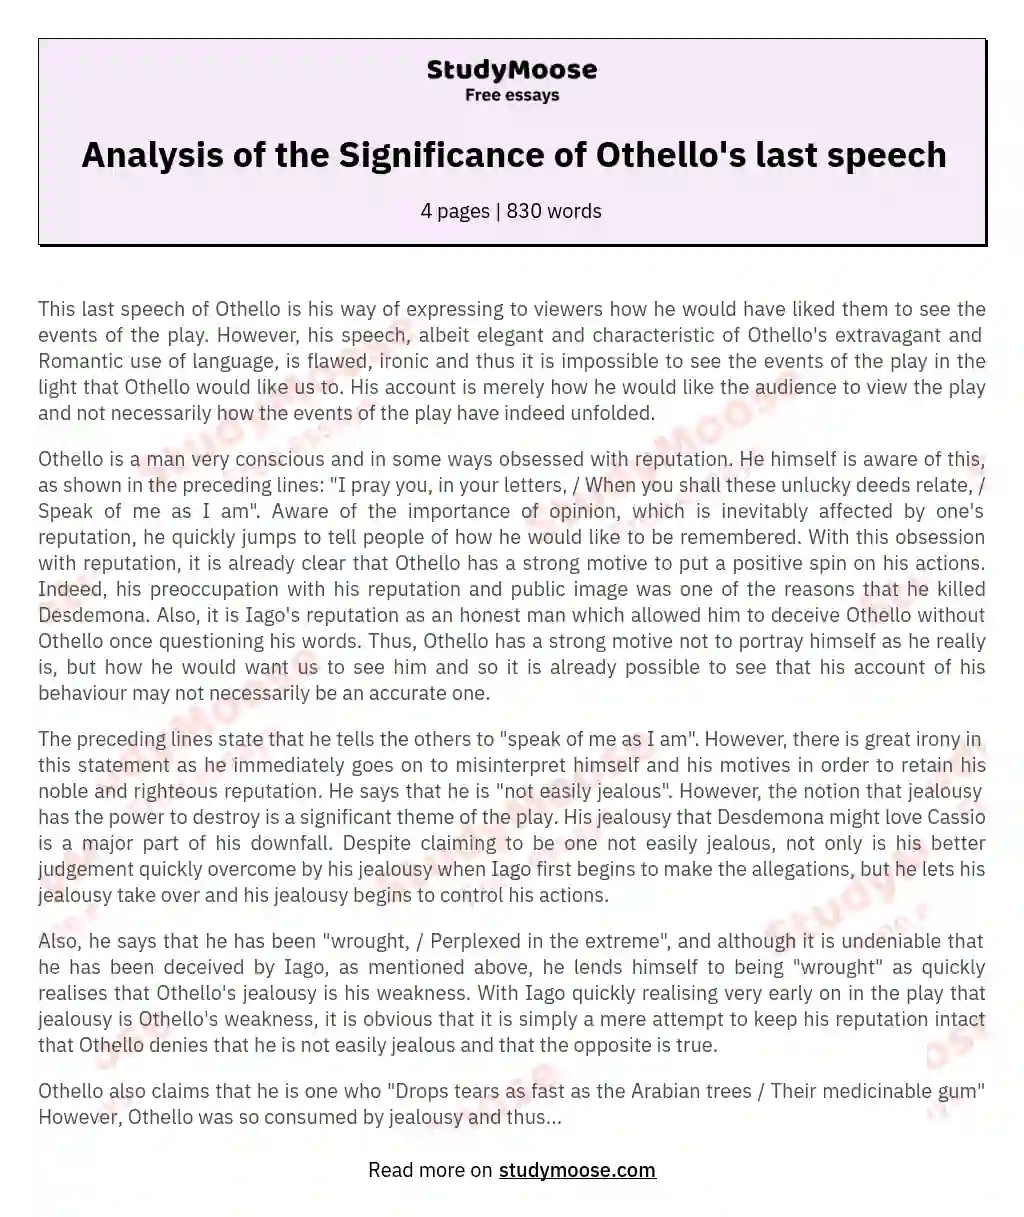 Analysis of the Significance of Othello's last speech essay